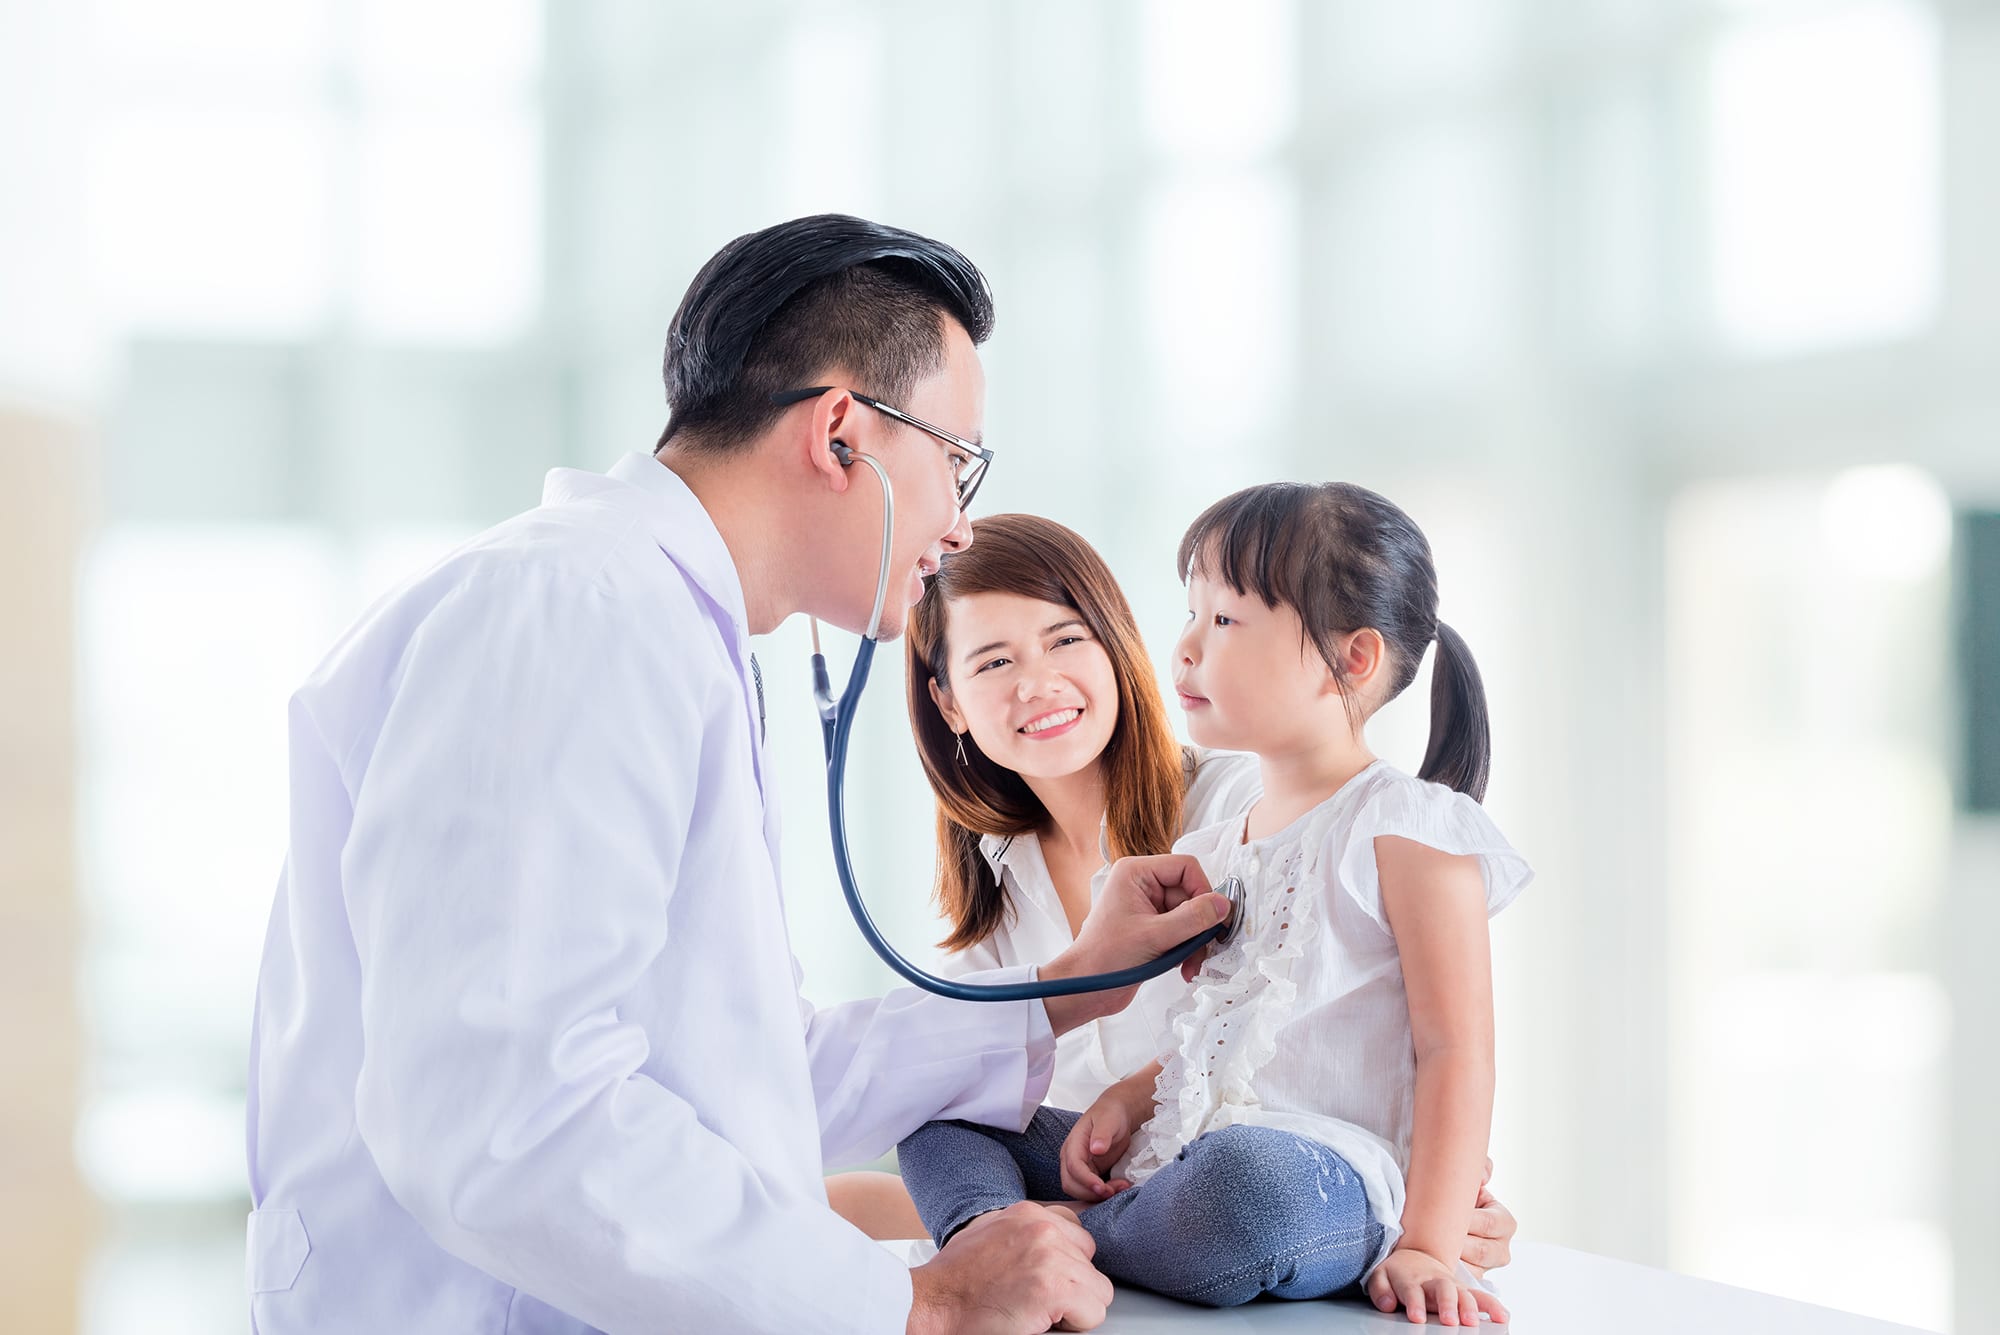 doctor examining a girl by stethoscope